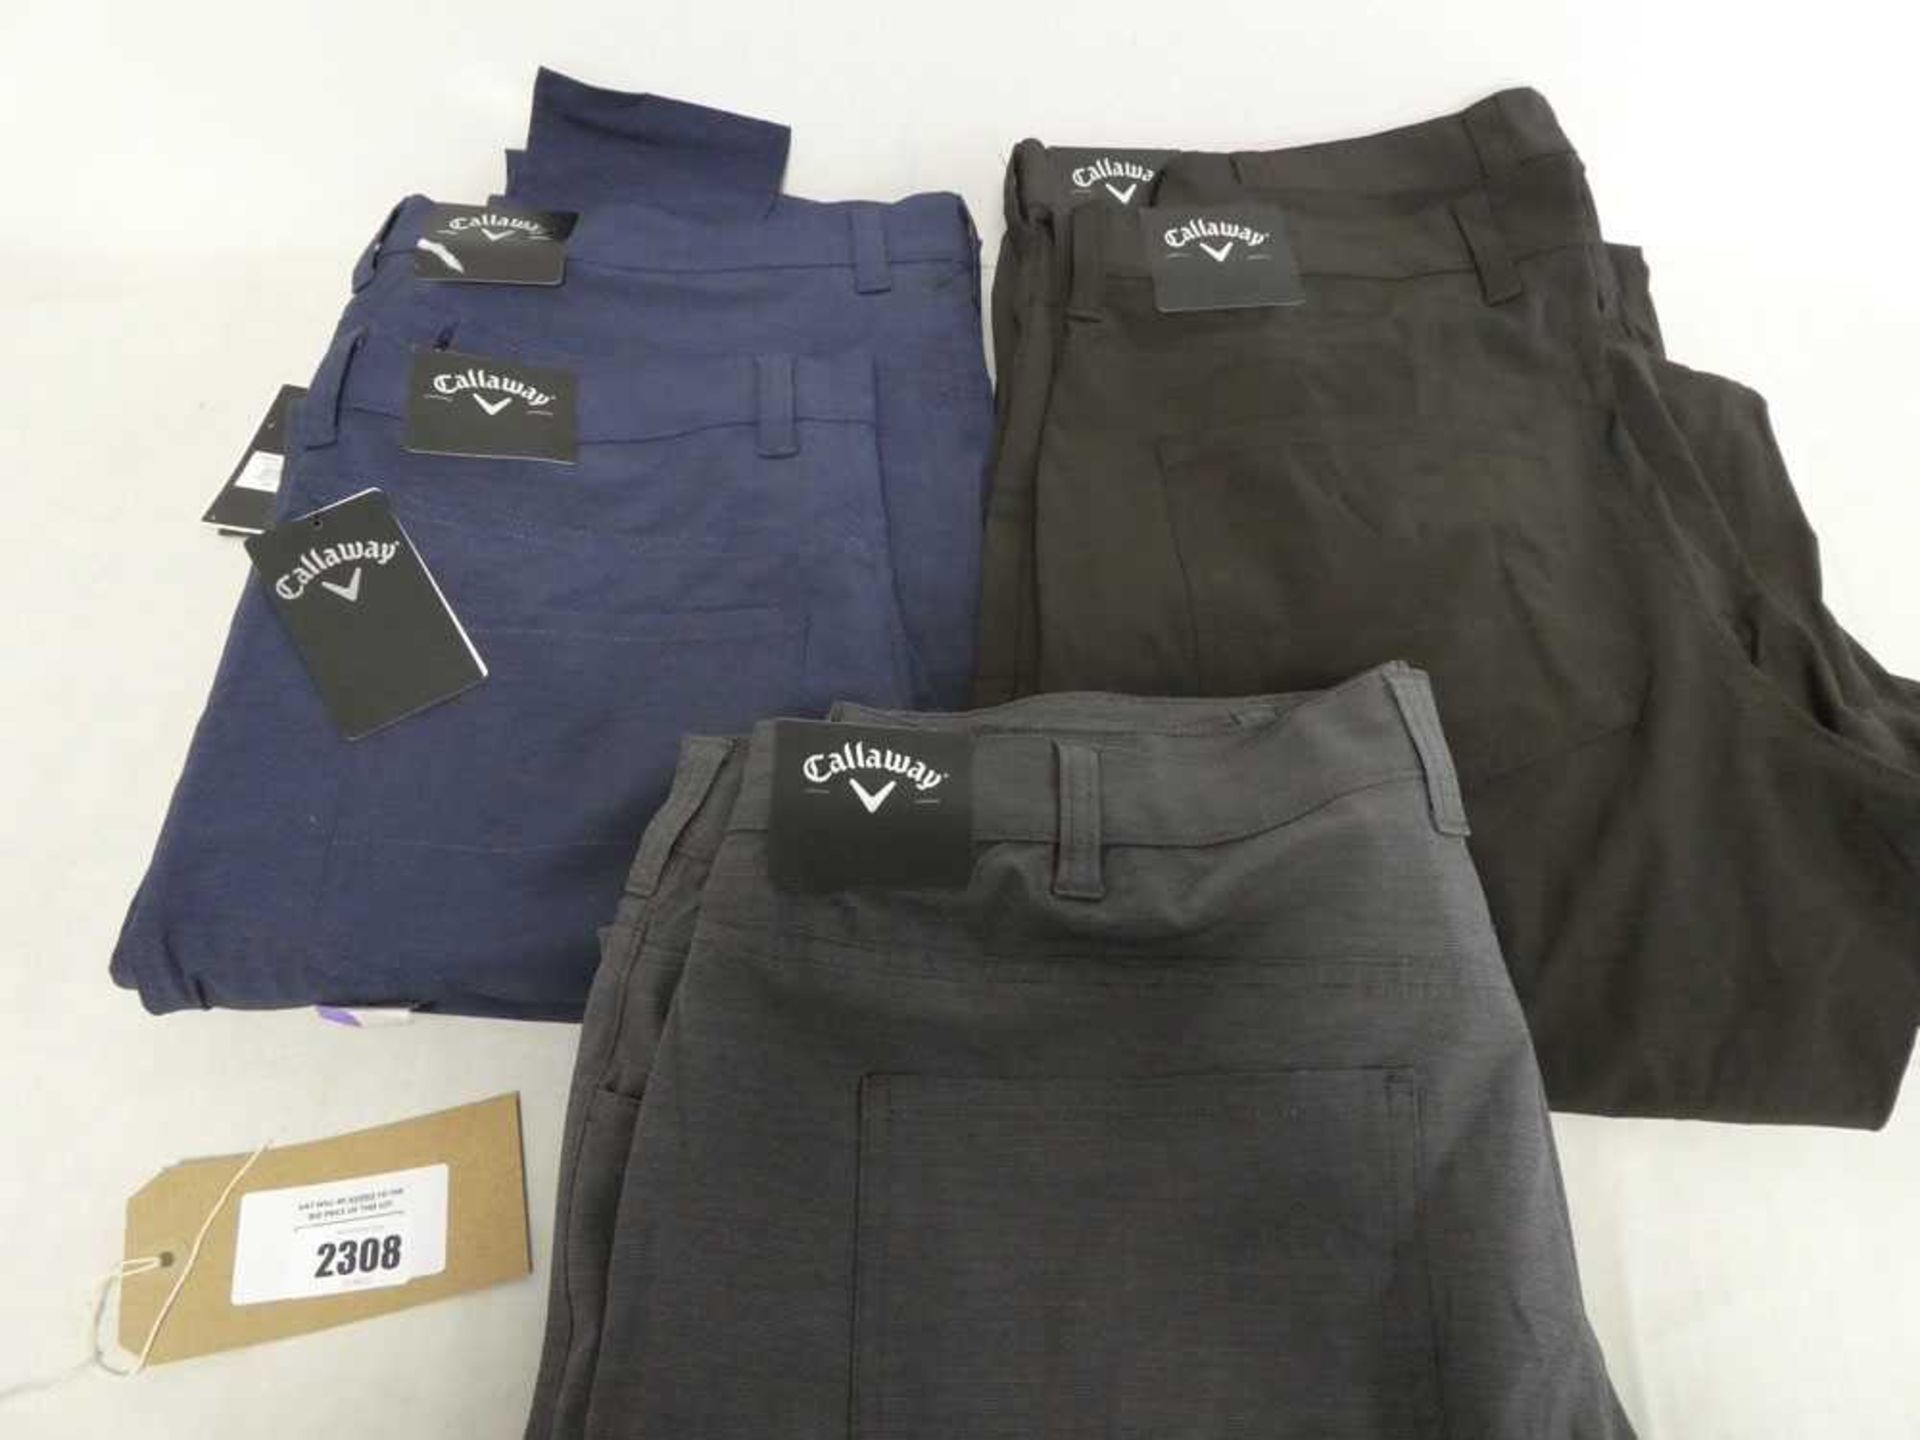 +VAT Bag containing 11 pairs of mens Callaway golf trousers W 30; L 34 (7 pairs) W 40; L 34 (2